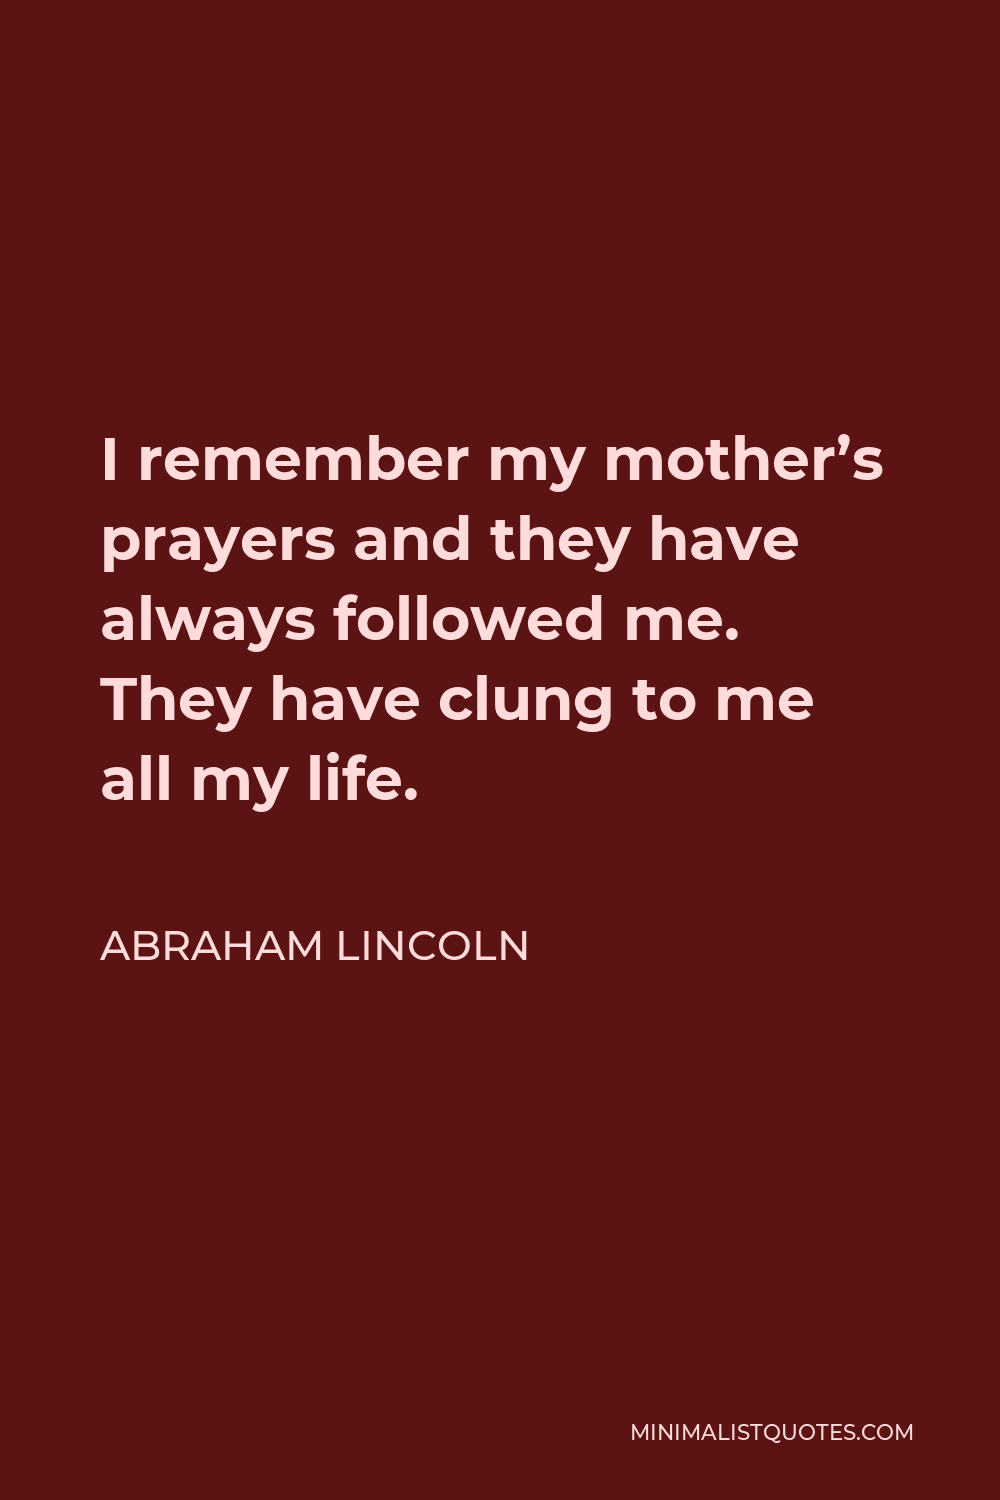 Abraham Lincoln Quote - I remember my mother’s prayers and they have always followed me. They have clung to me all my life.